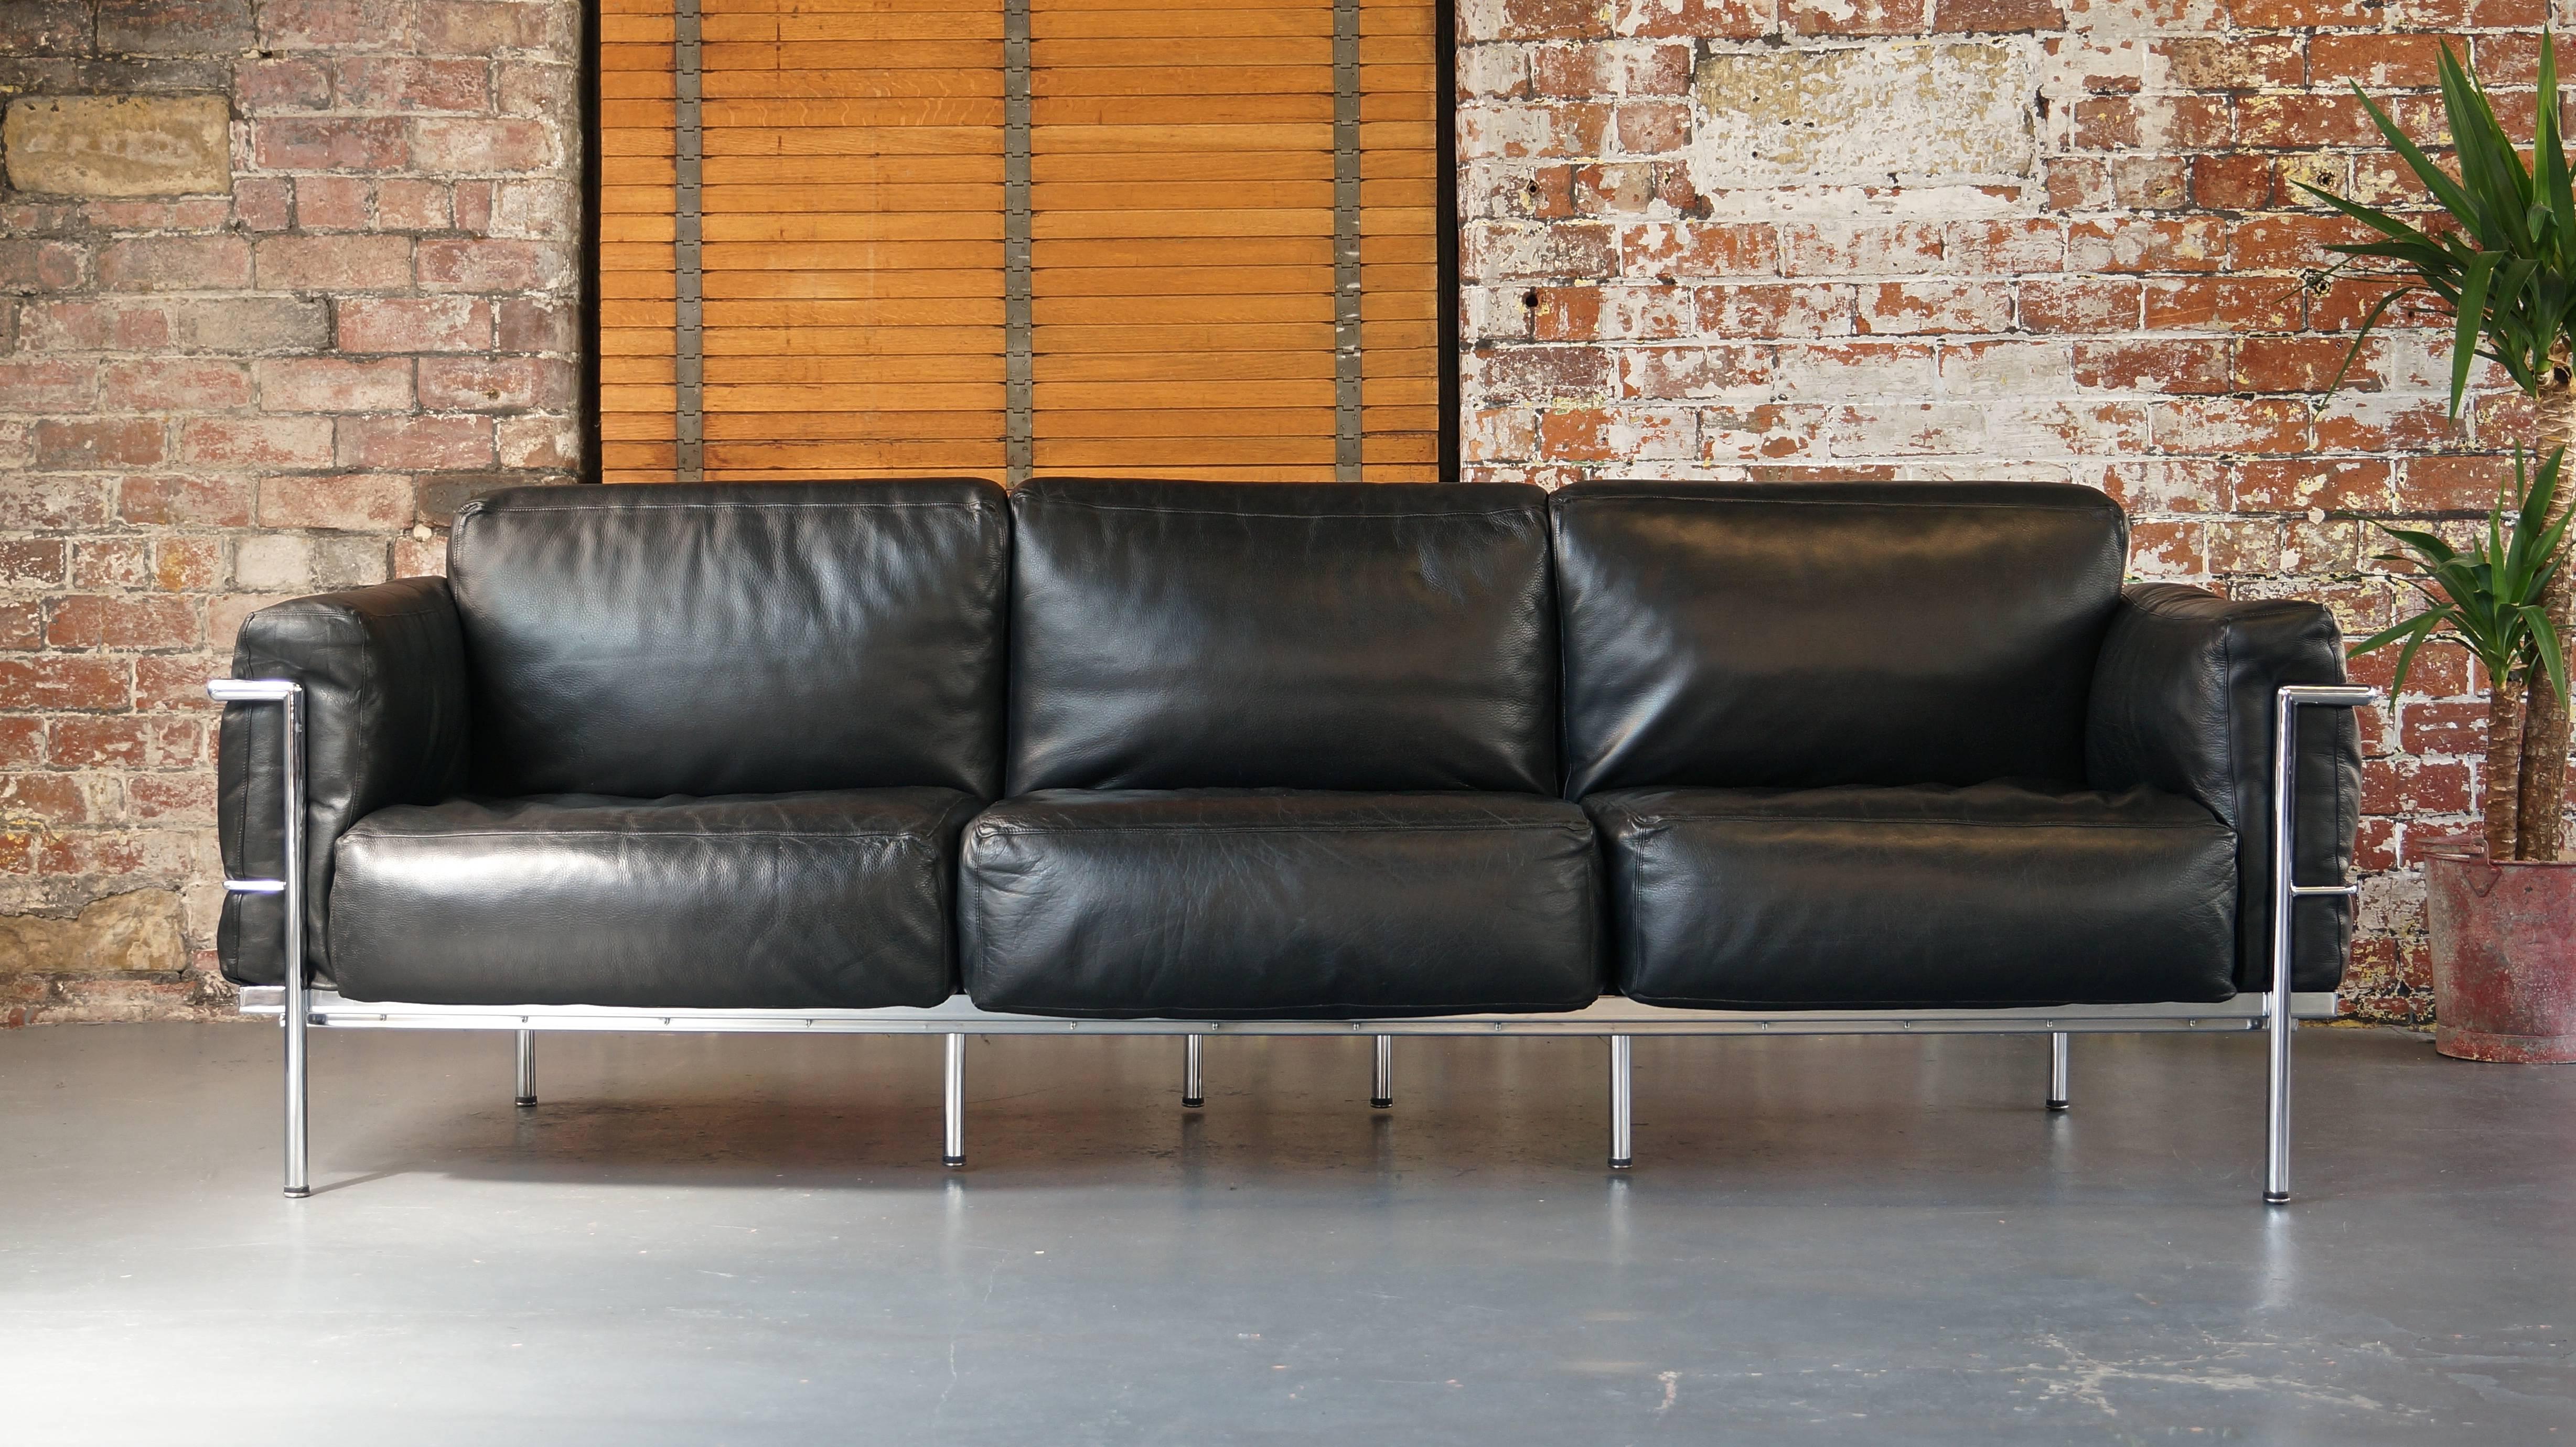 Vintage leather Grand Confort LC3 three-seat sofa

Designed by Le Corbusier, Italy 1927 

Very high quality LC3 Grand Confort three-seat sofa in high quality black leather.

The sofa has just been dismantled, and the frames and leather